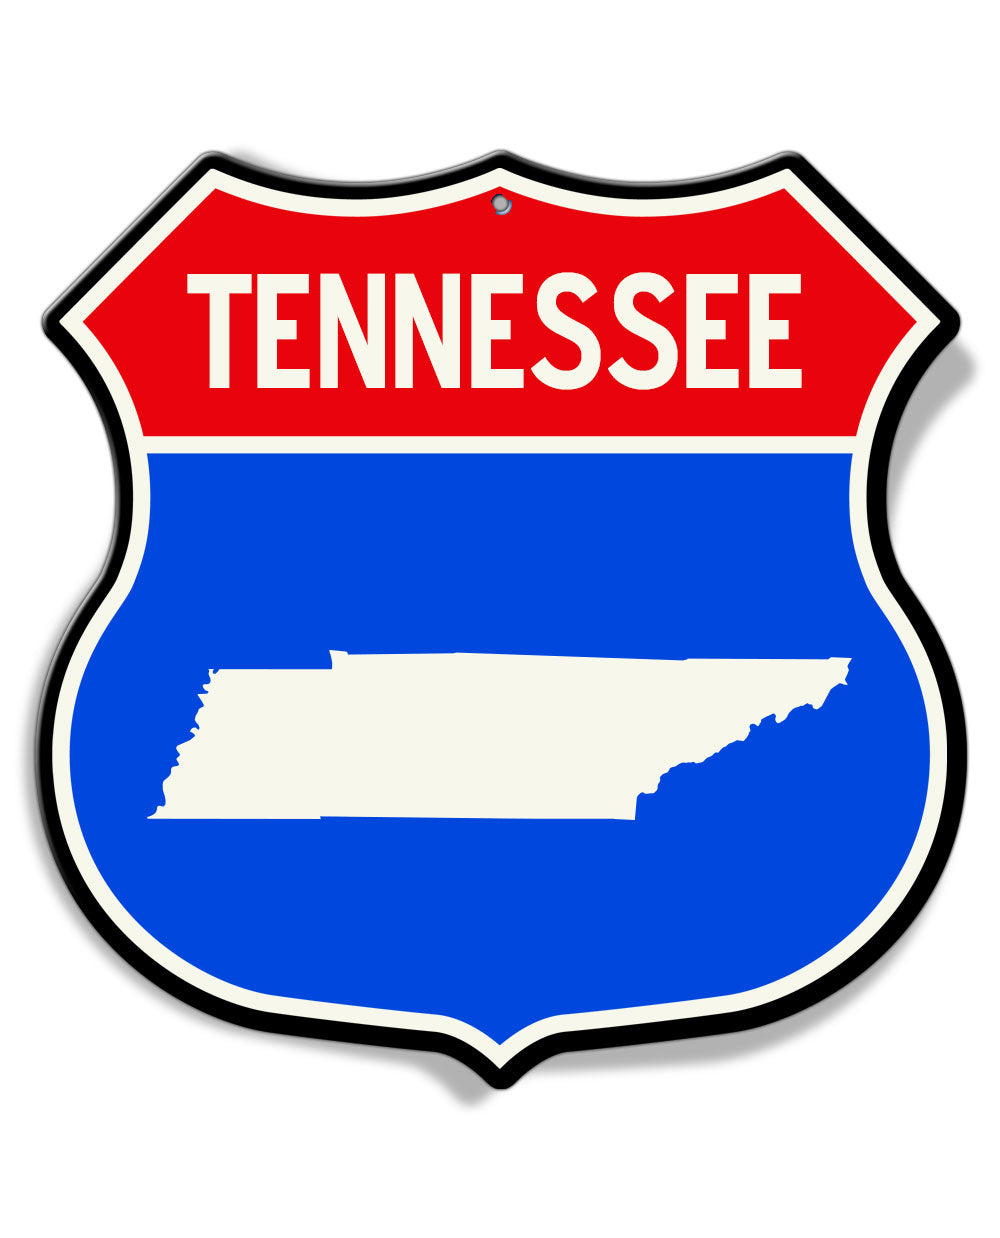 State of Tennessee Interstate - Shield Shape - Aluminum Sign